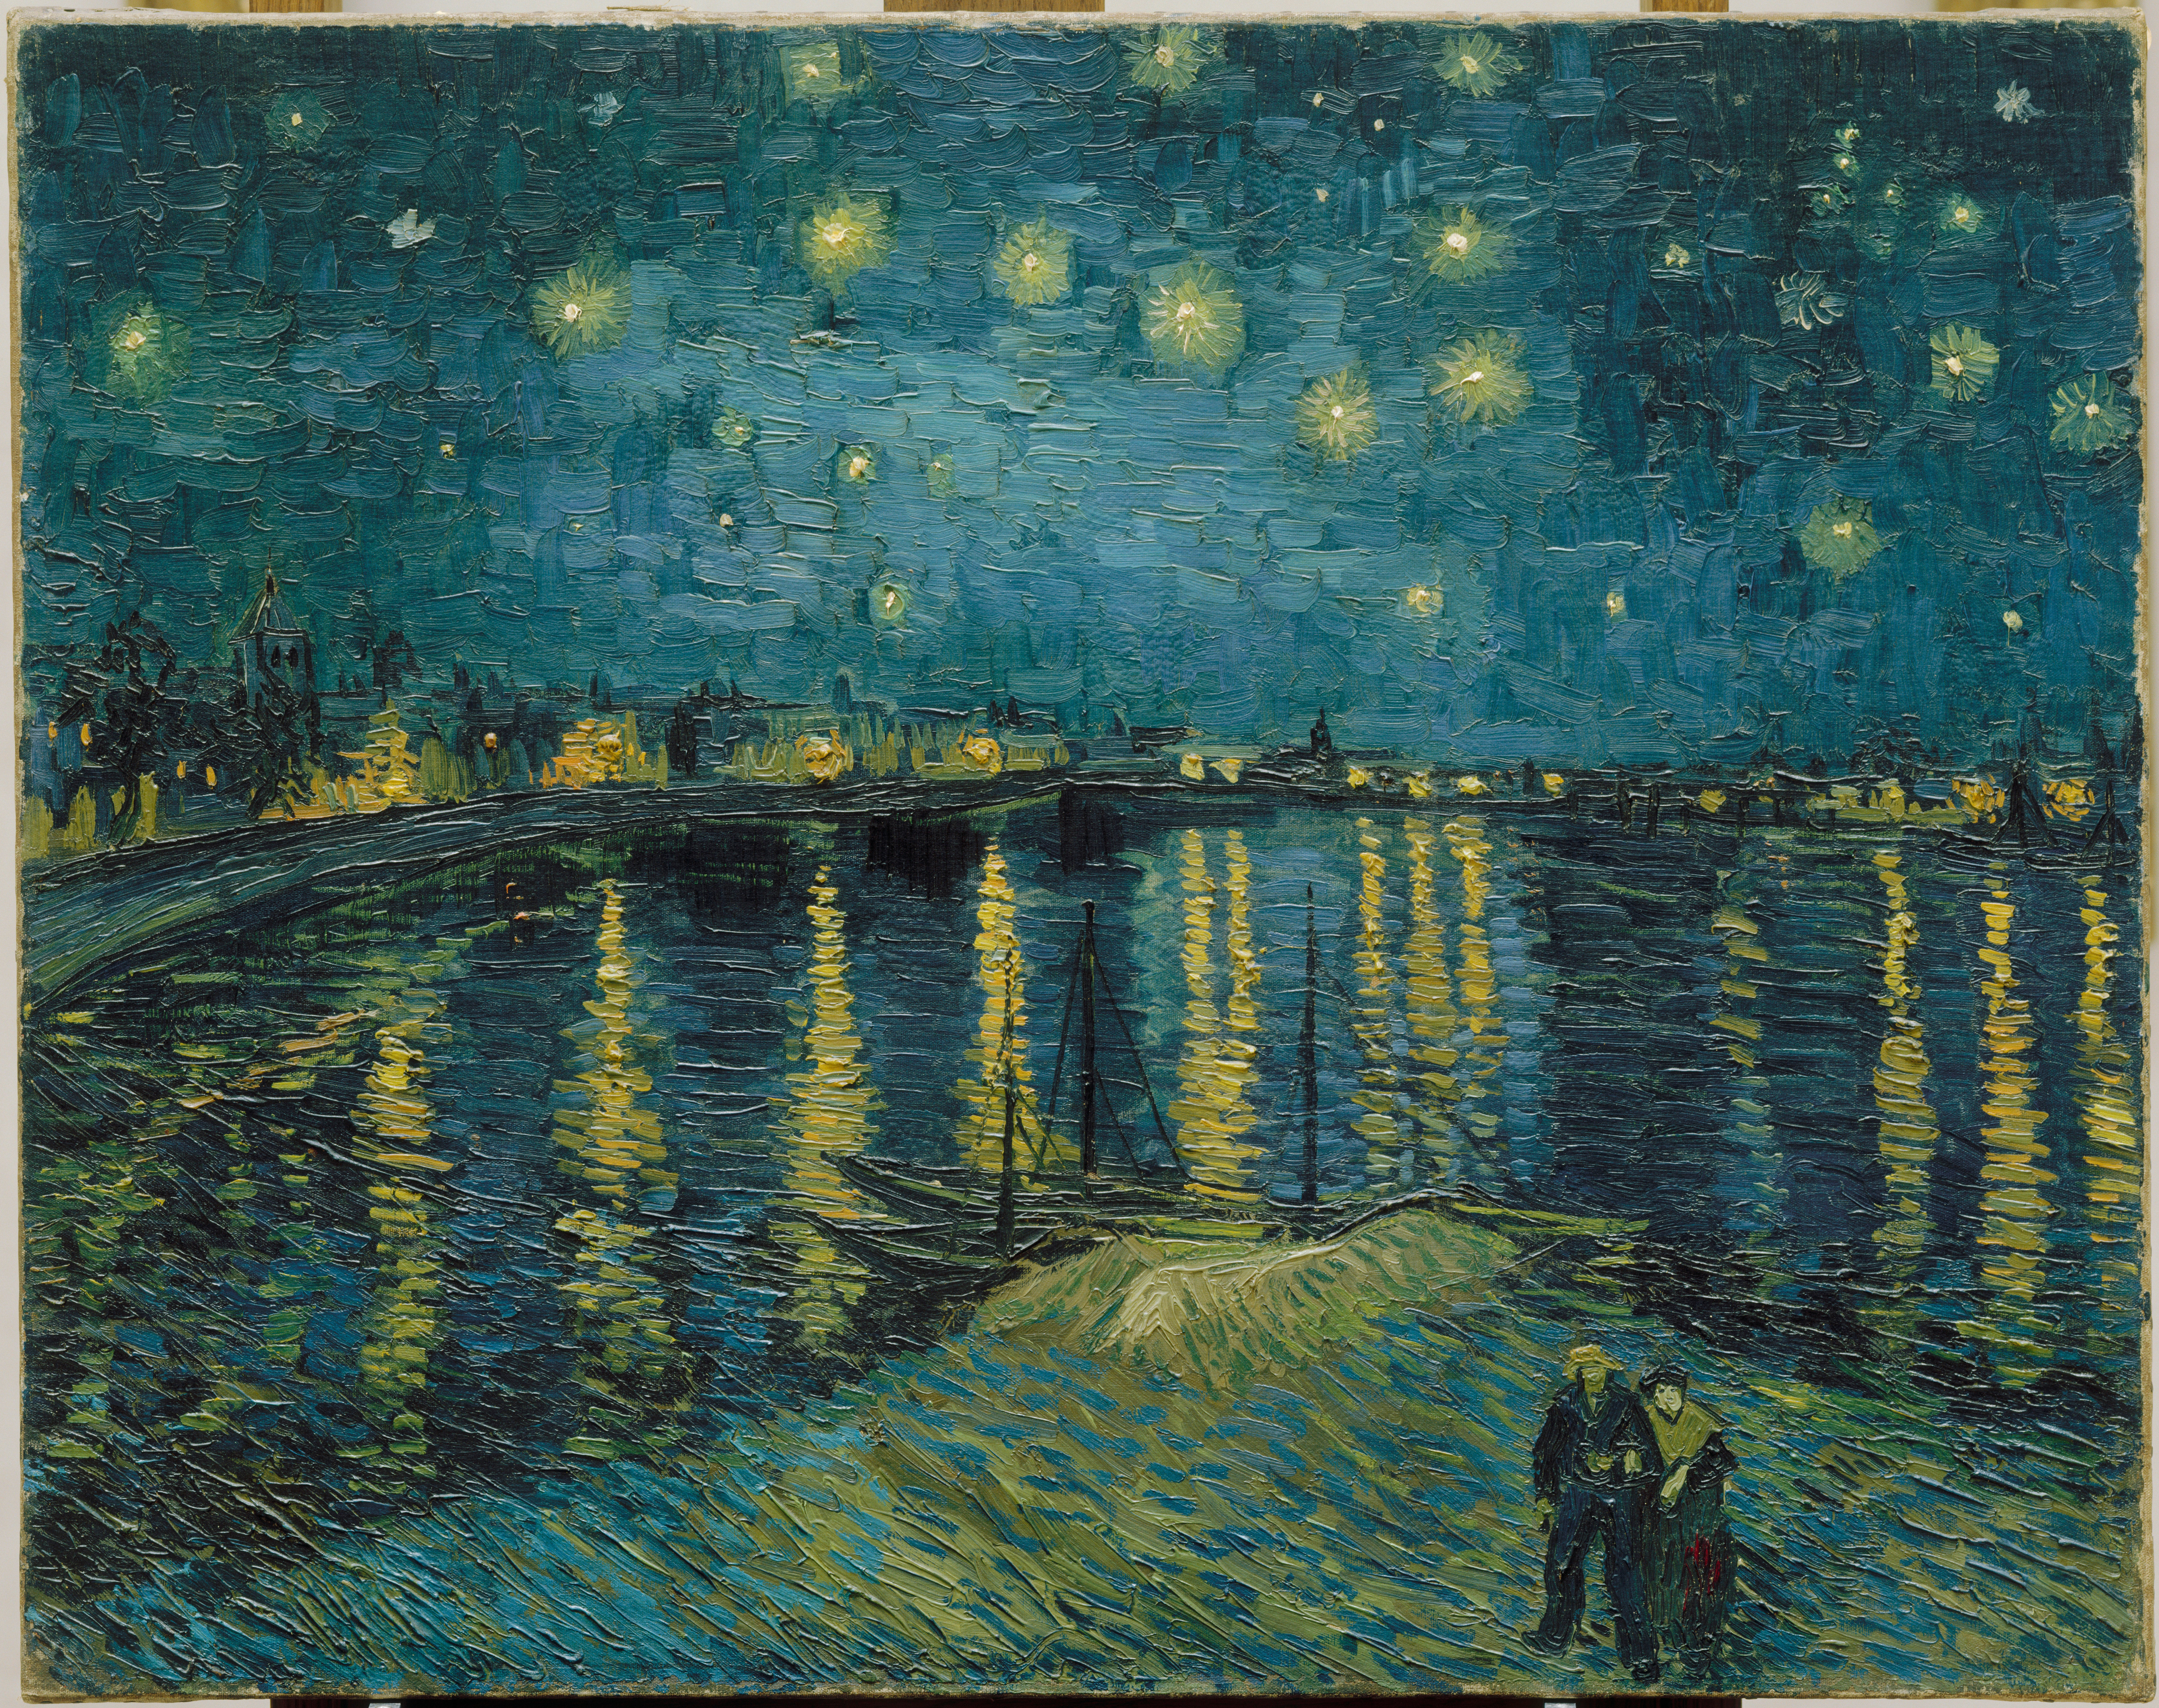 Vincent van Gogh (Dutch, 1853–1890). Starry Night, 1888. Oil on canvas; 28 3/4 x 36 1/4 in. (73 x 92 cm). Musée d'Orsay, Paris, gift of M. and Mme Robert Khan-Sriber, in memory of M. and Mme Fernand Moch, 1975, RF 1975-19.